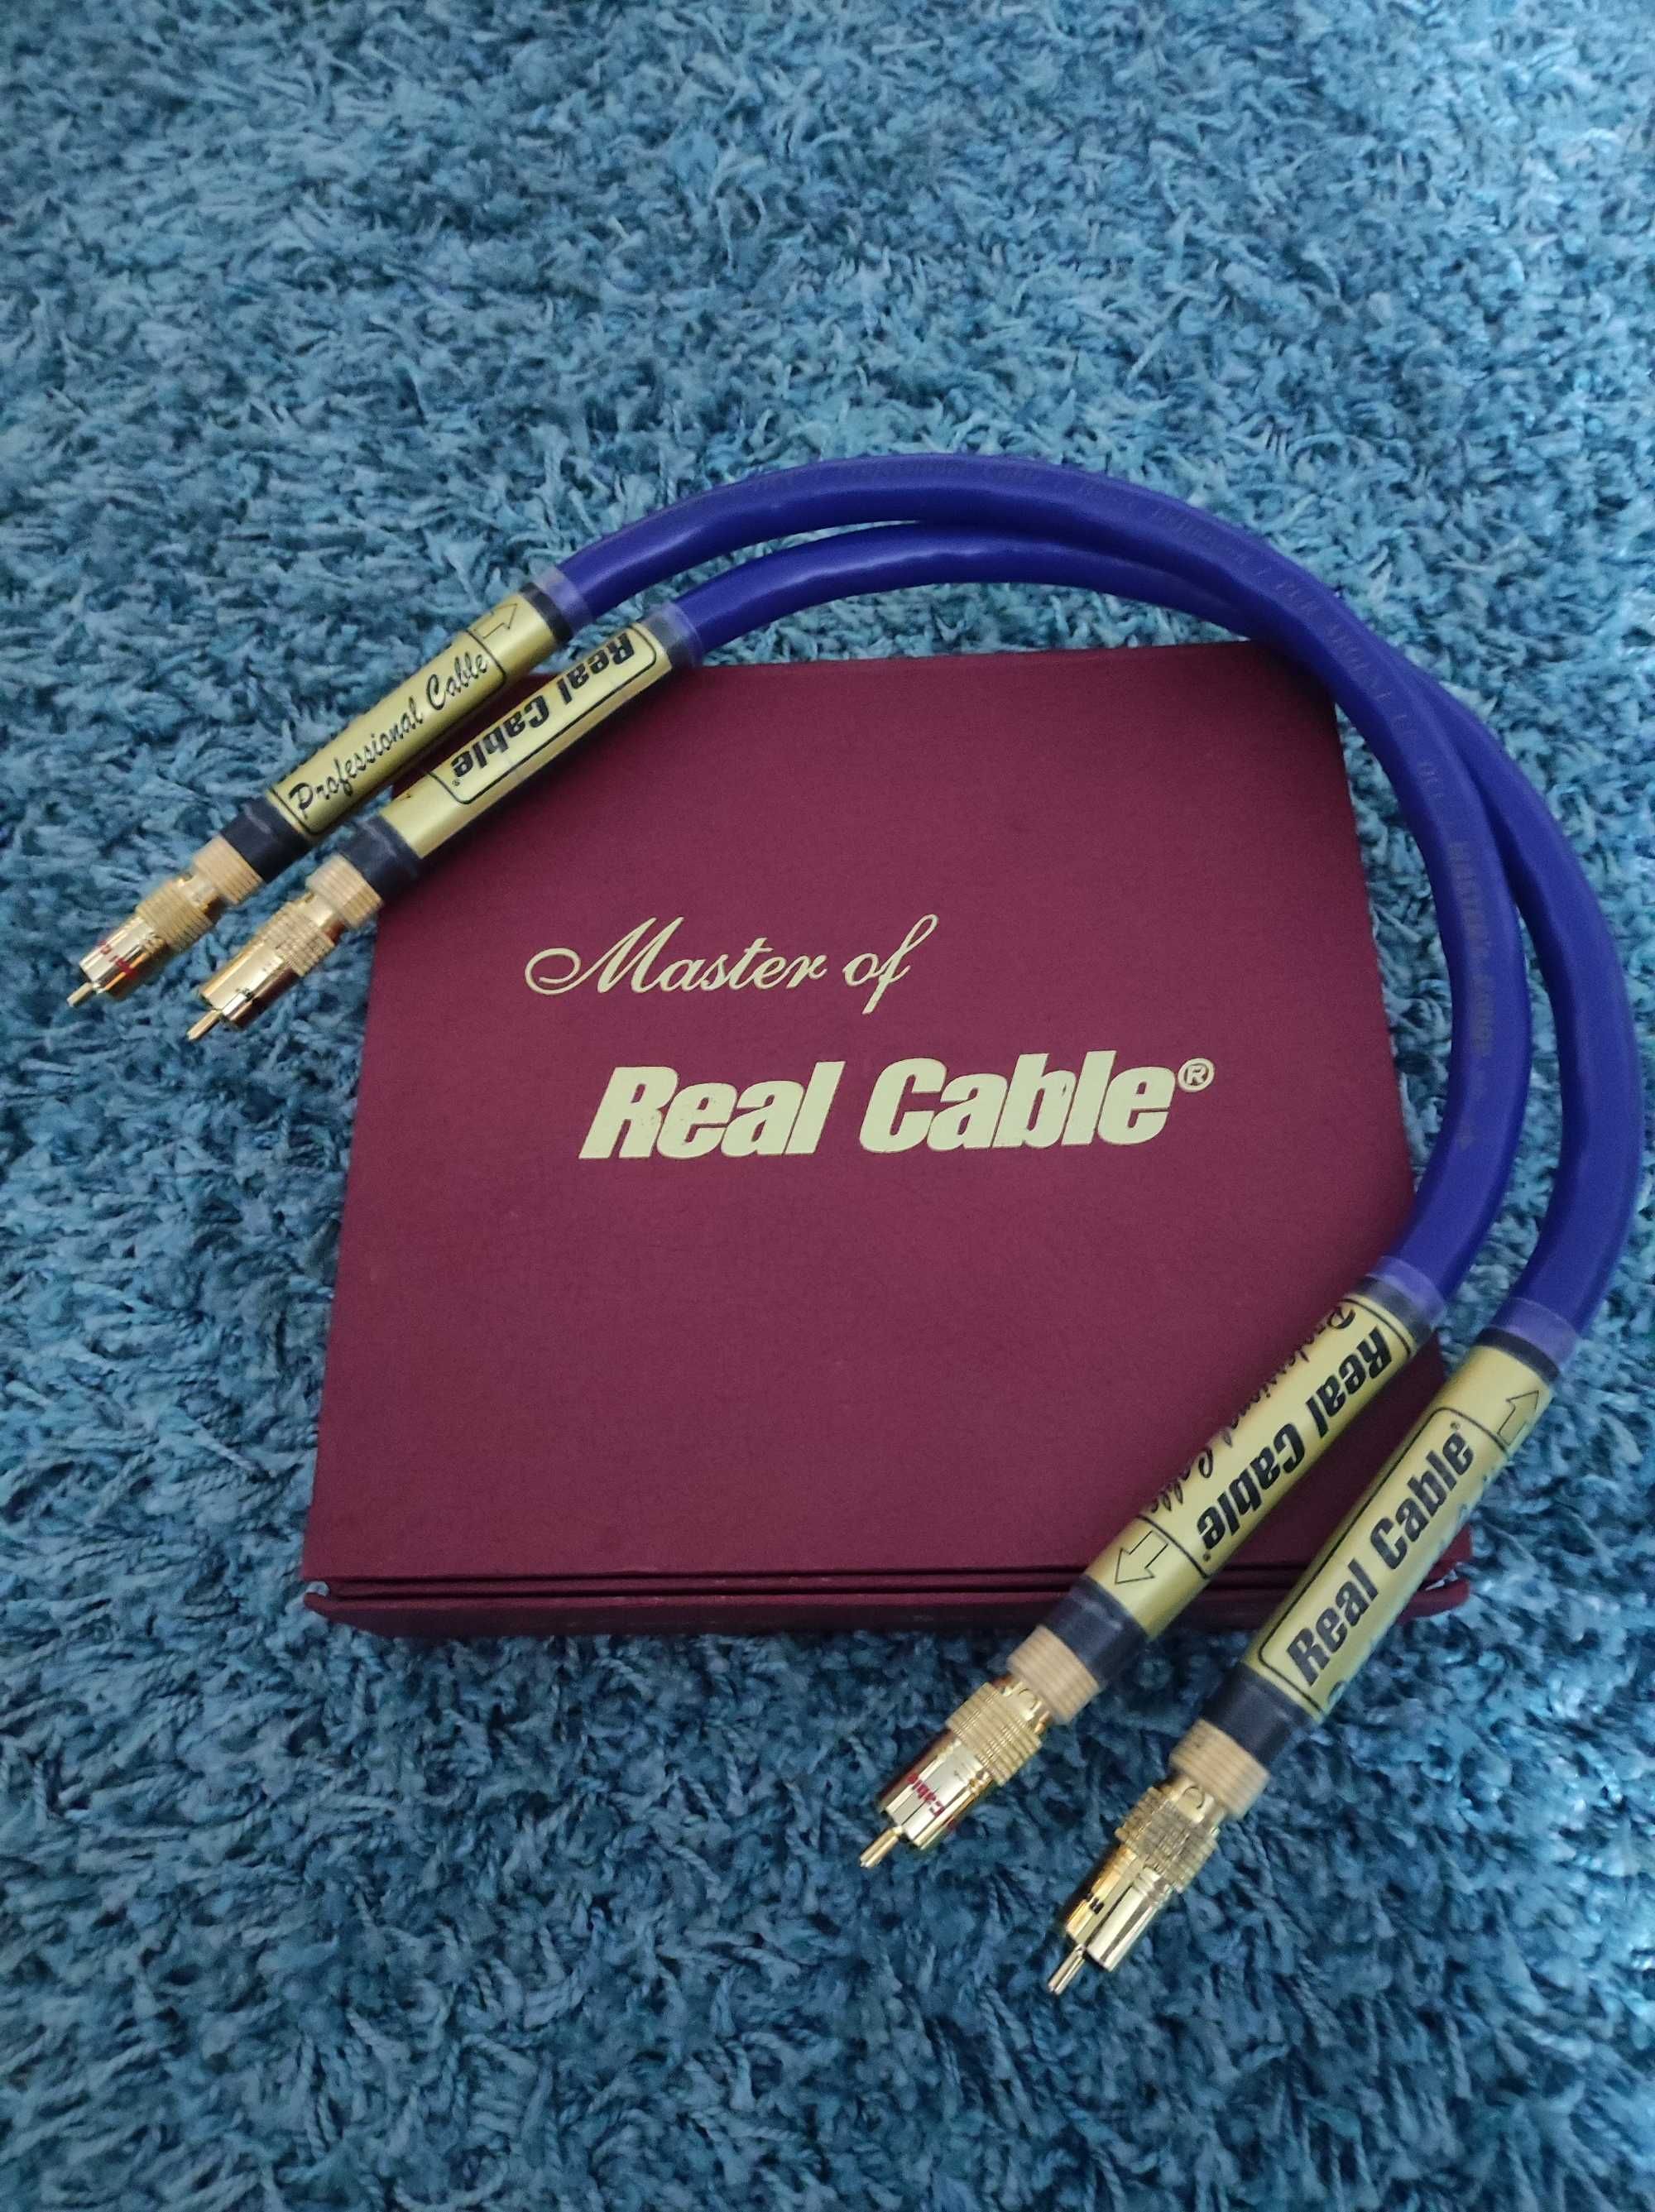 Real Cable Master of